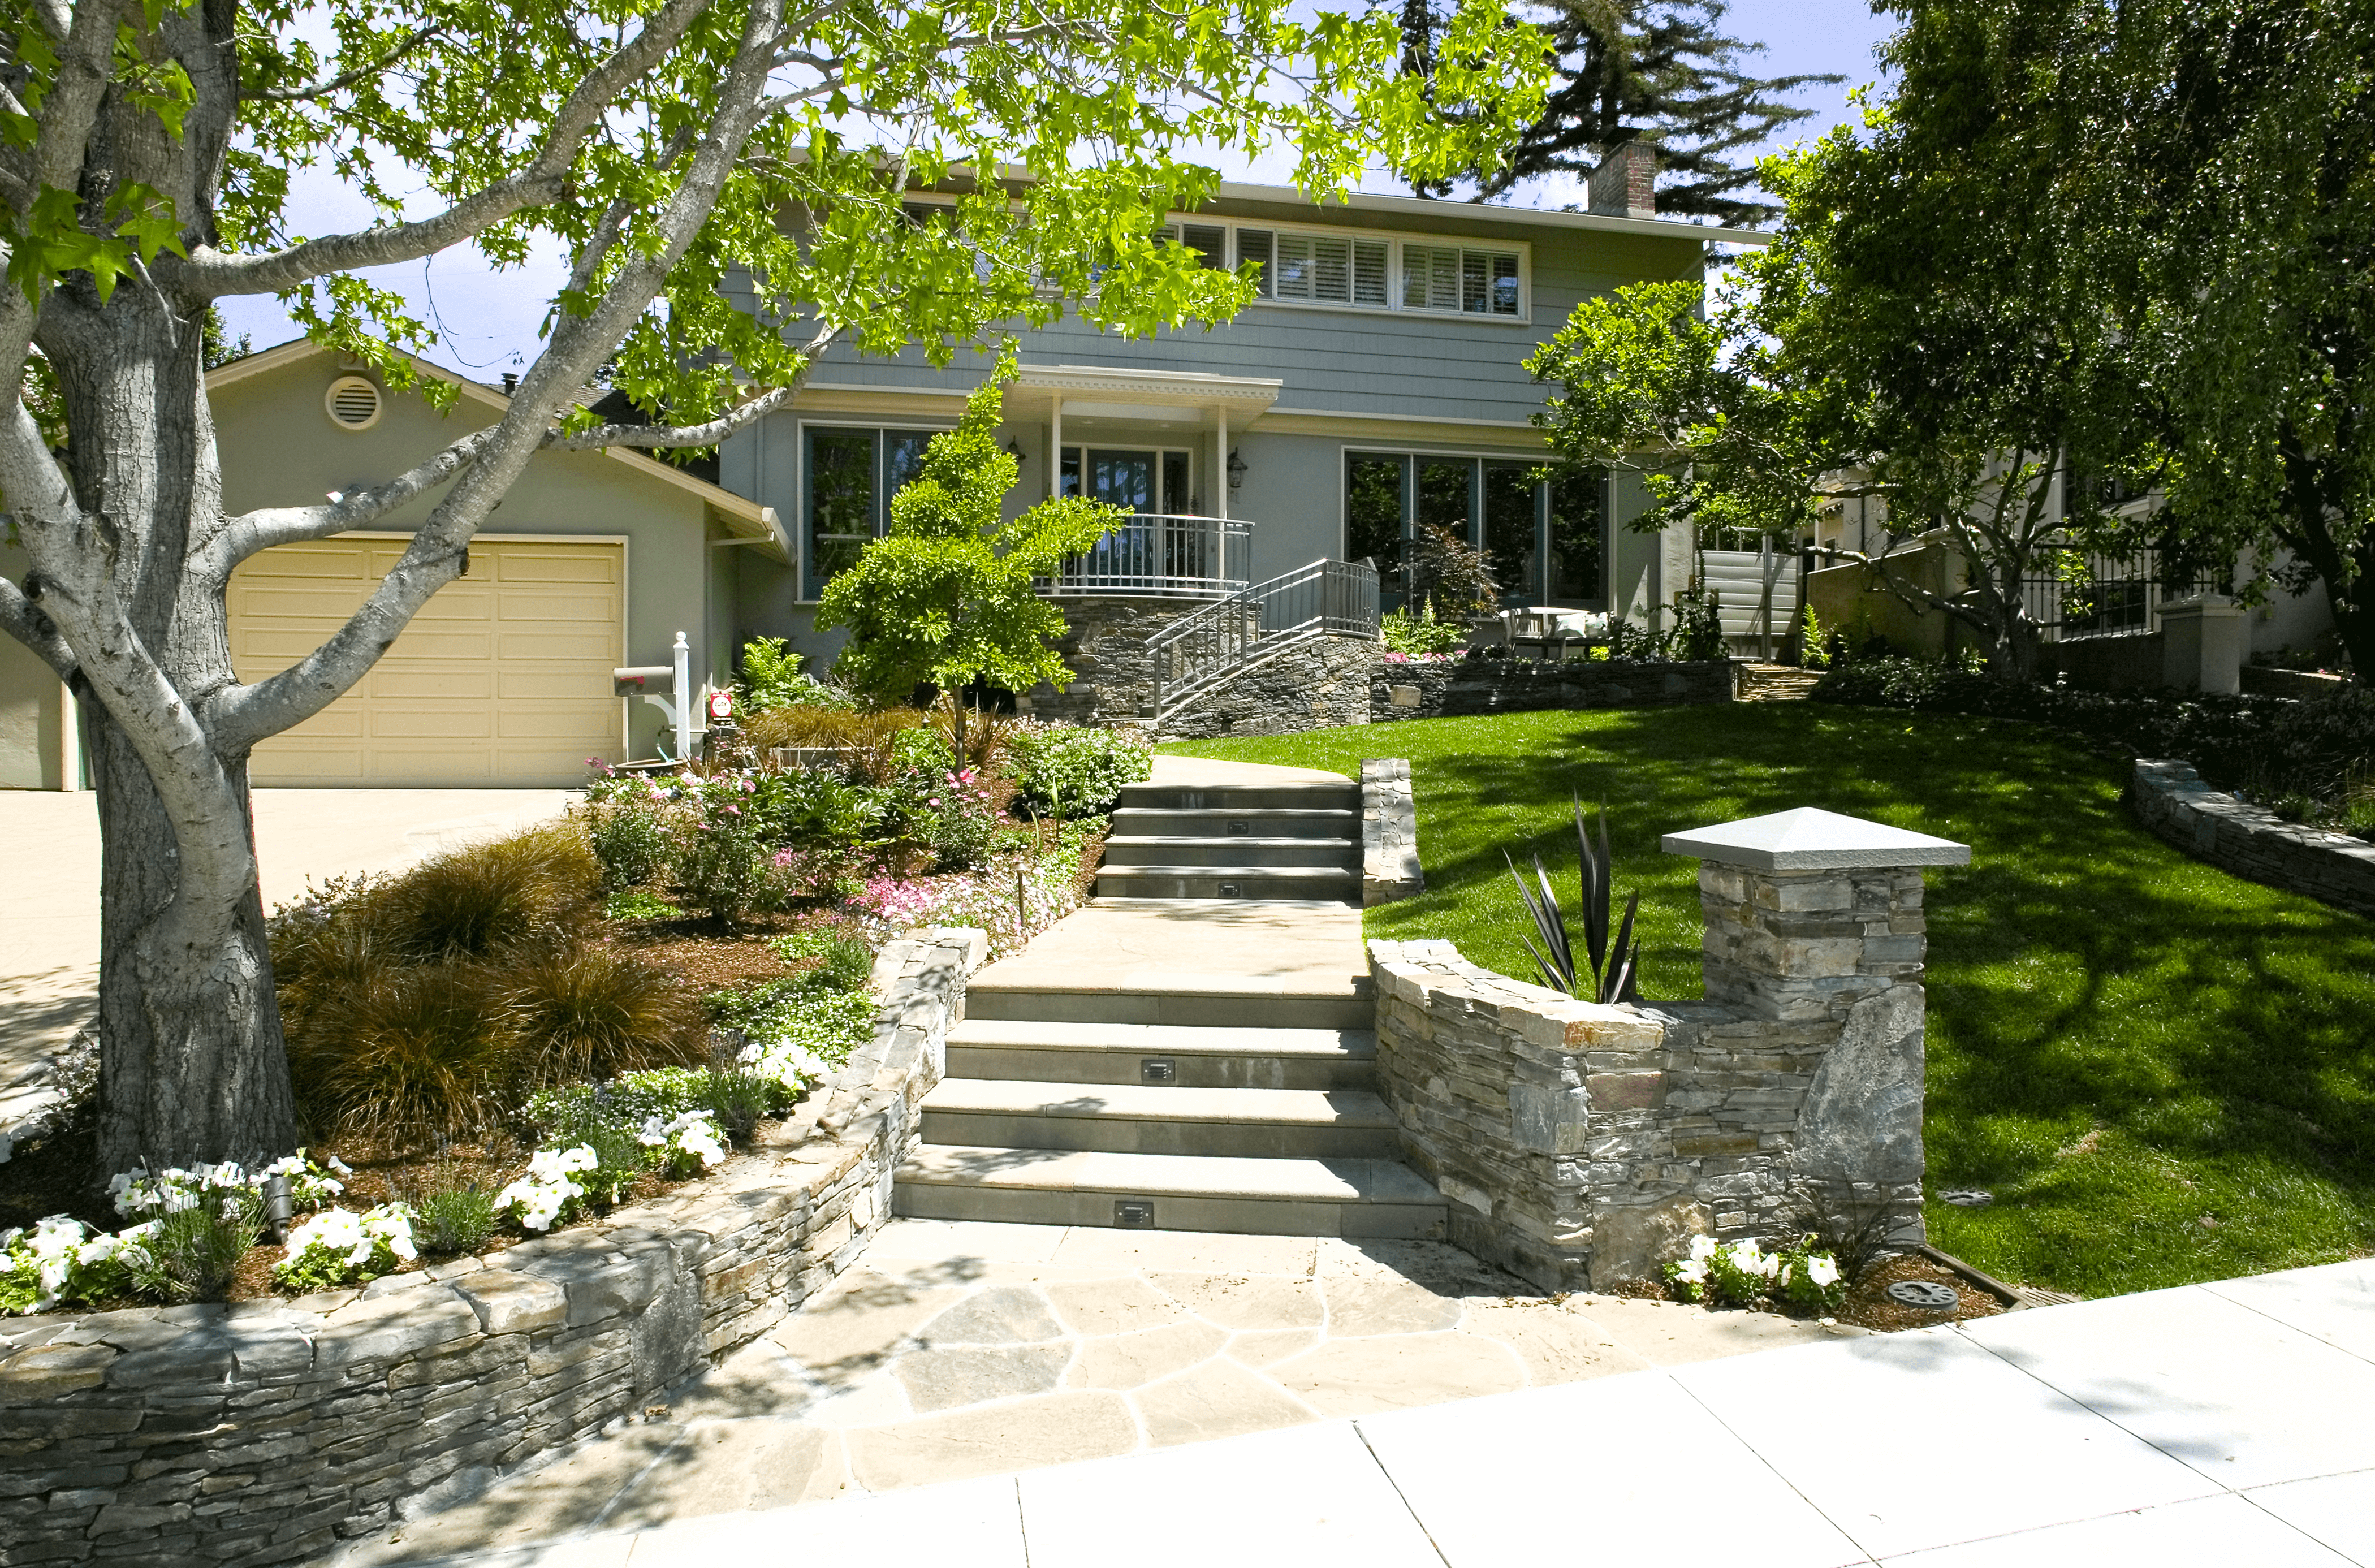 Gorgeous contemporary custom landscaped stone stairs in mid-century home front yard